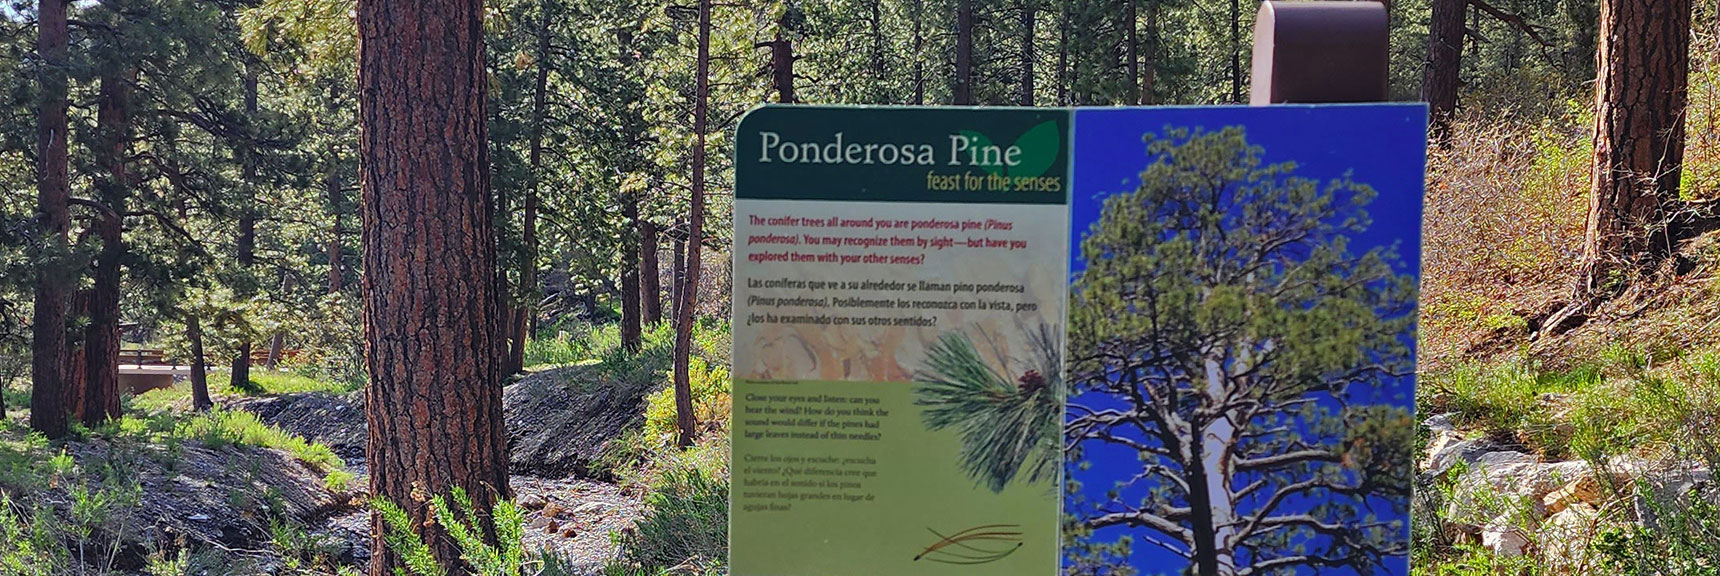 Invites Visitors to Experience a Ponderosa Pine with All Five Senses | Acastus Trail | Mt Charleston Wilderness | Spring Mountains, Nevada